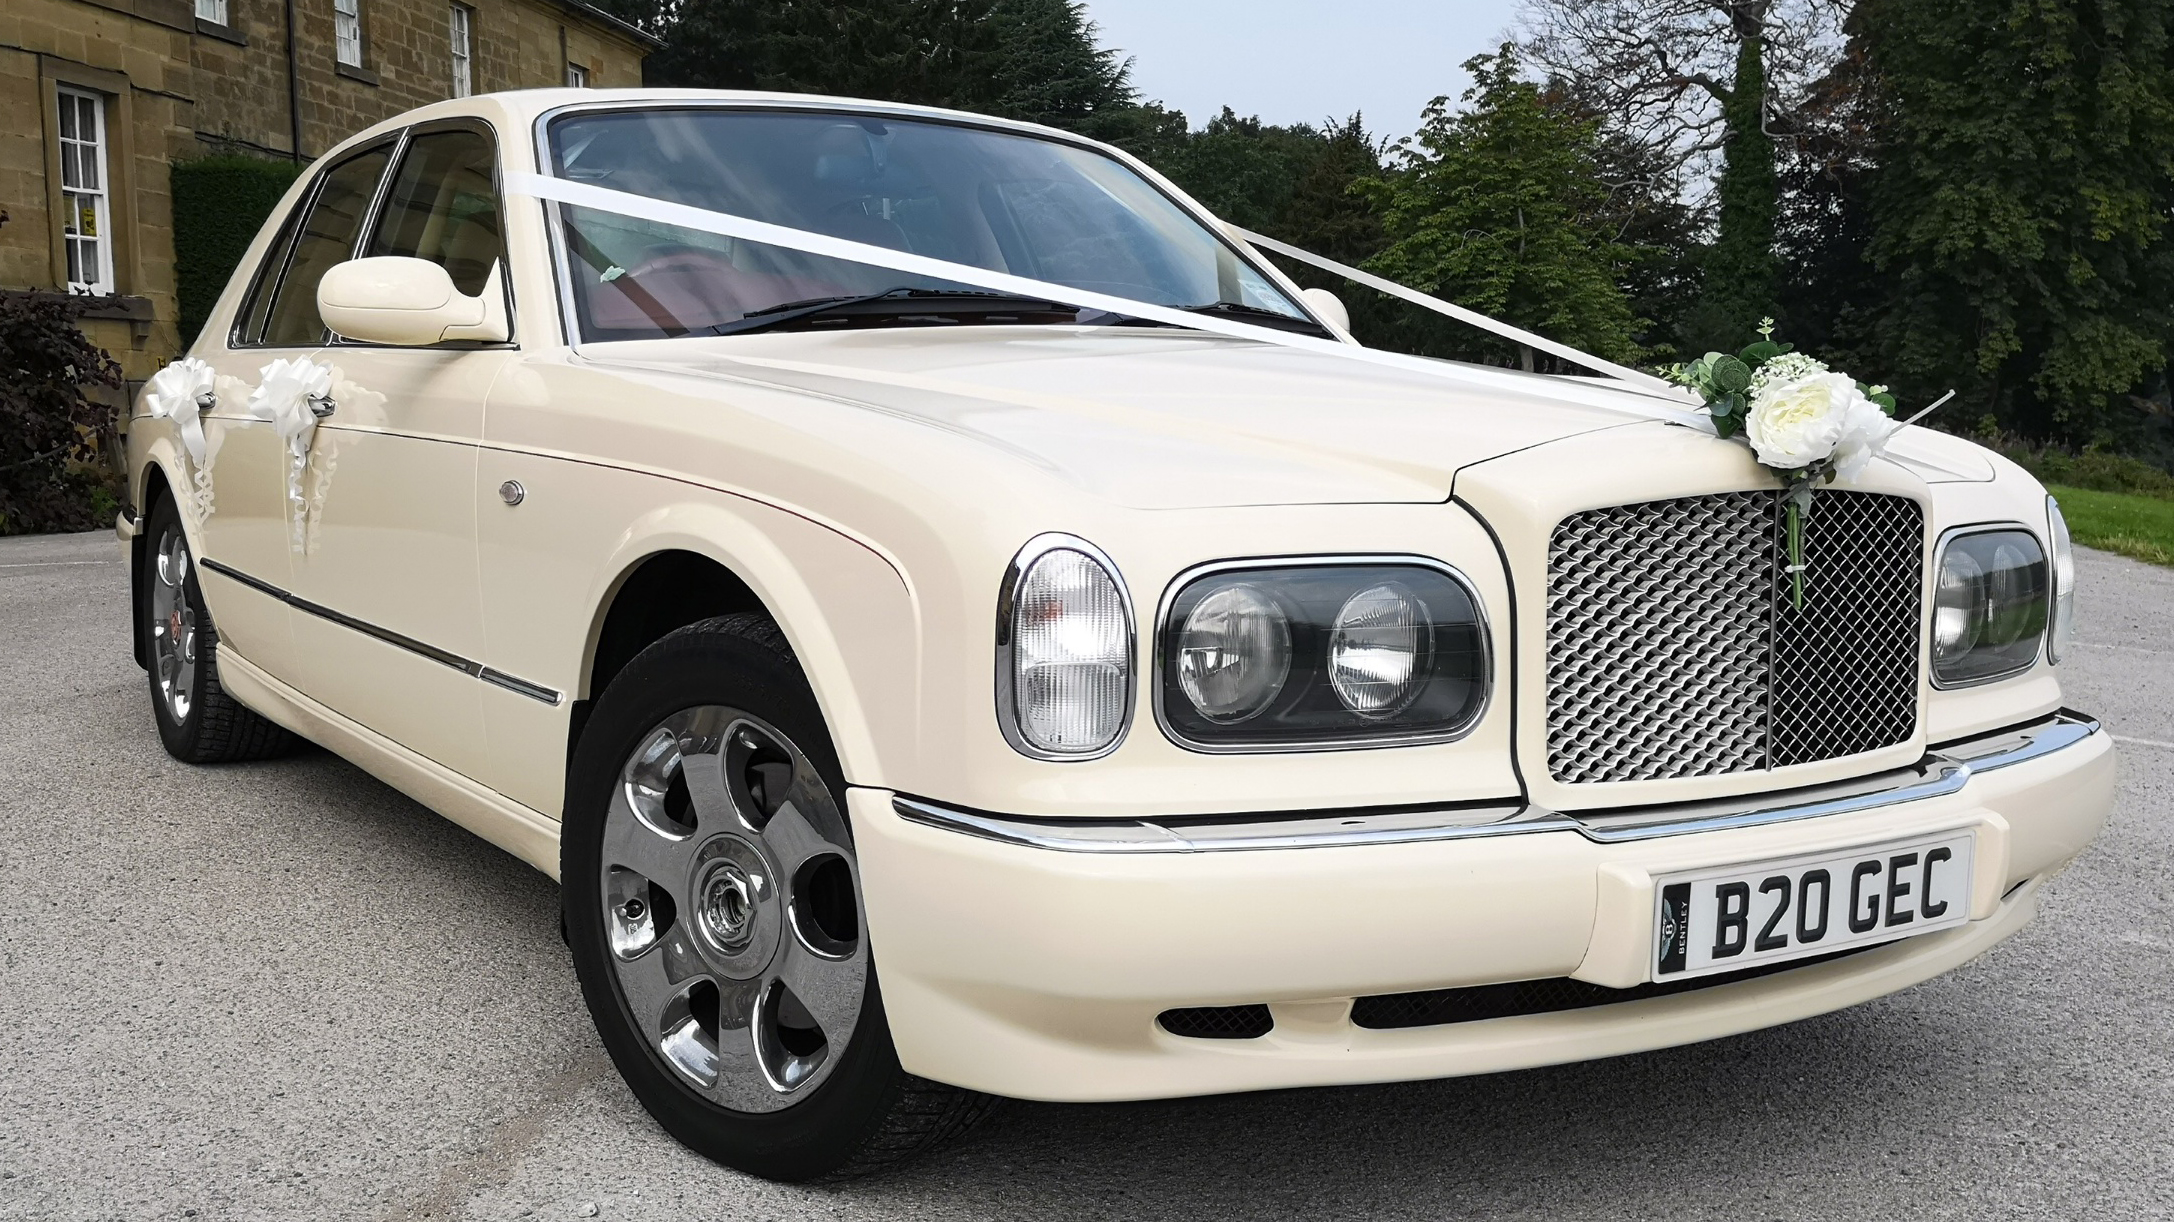 Bentley Arnage wedding car for hire in Barnsley, South Yorkshire